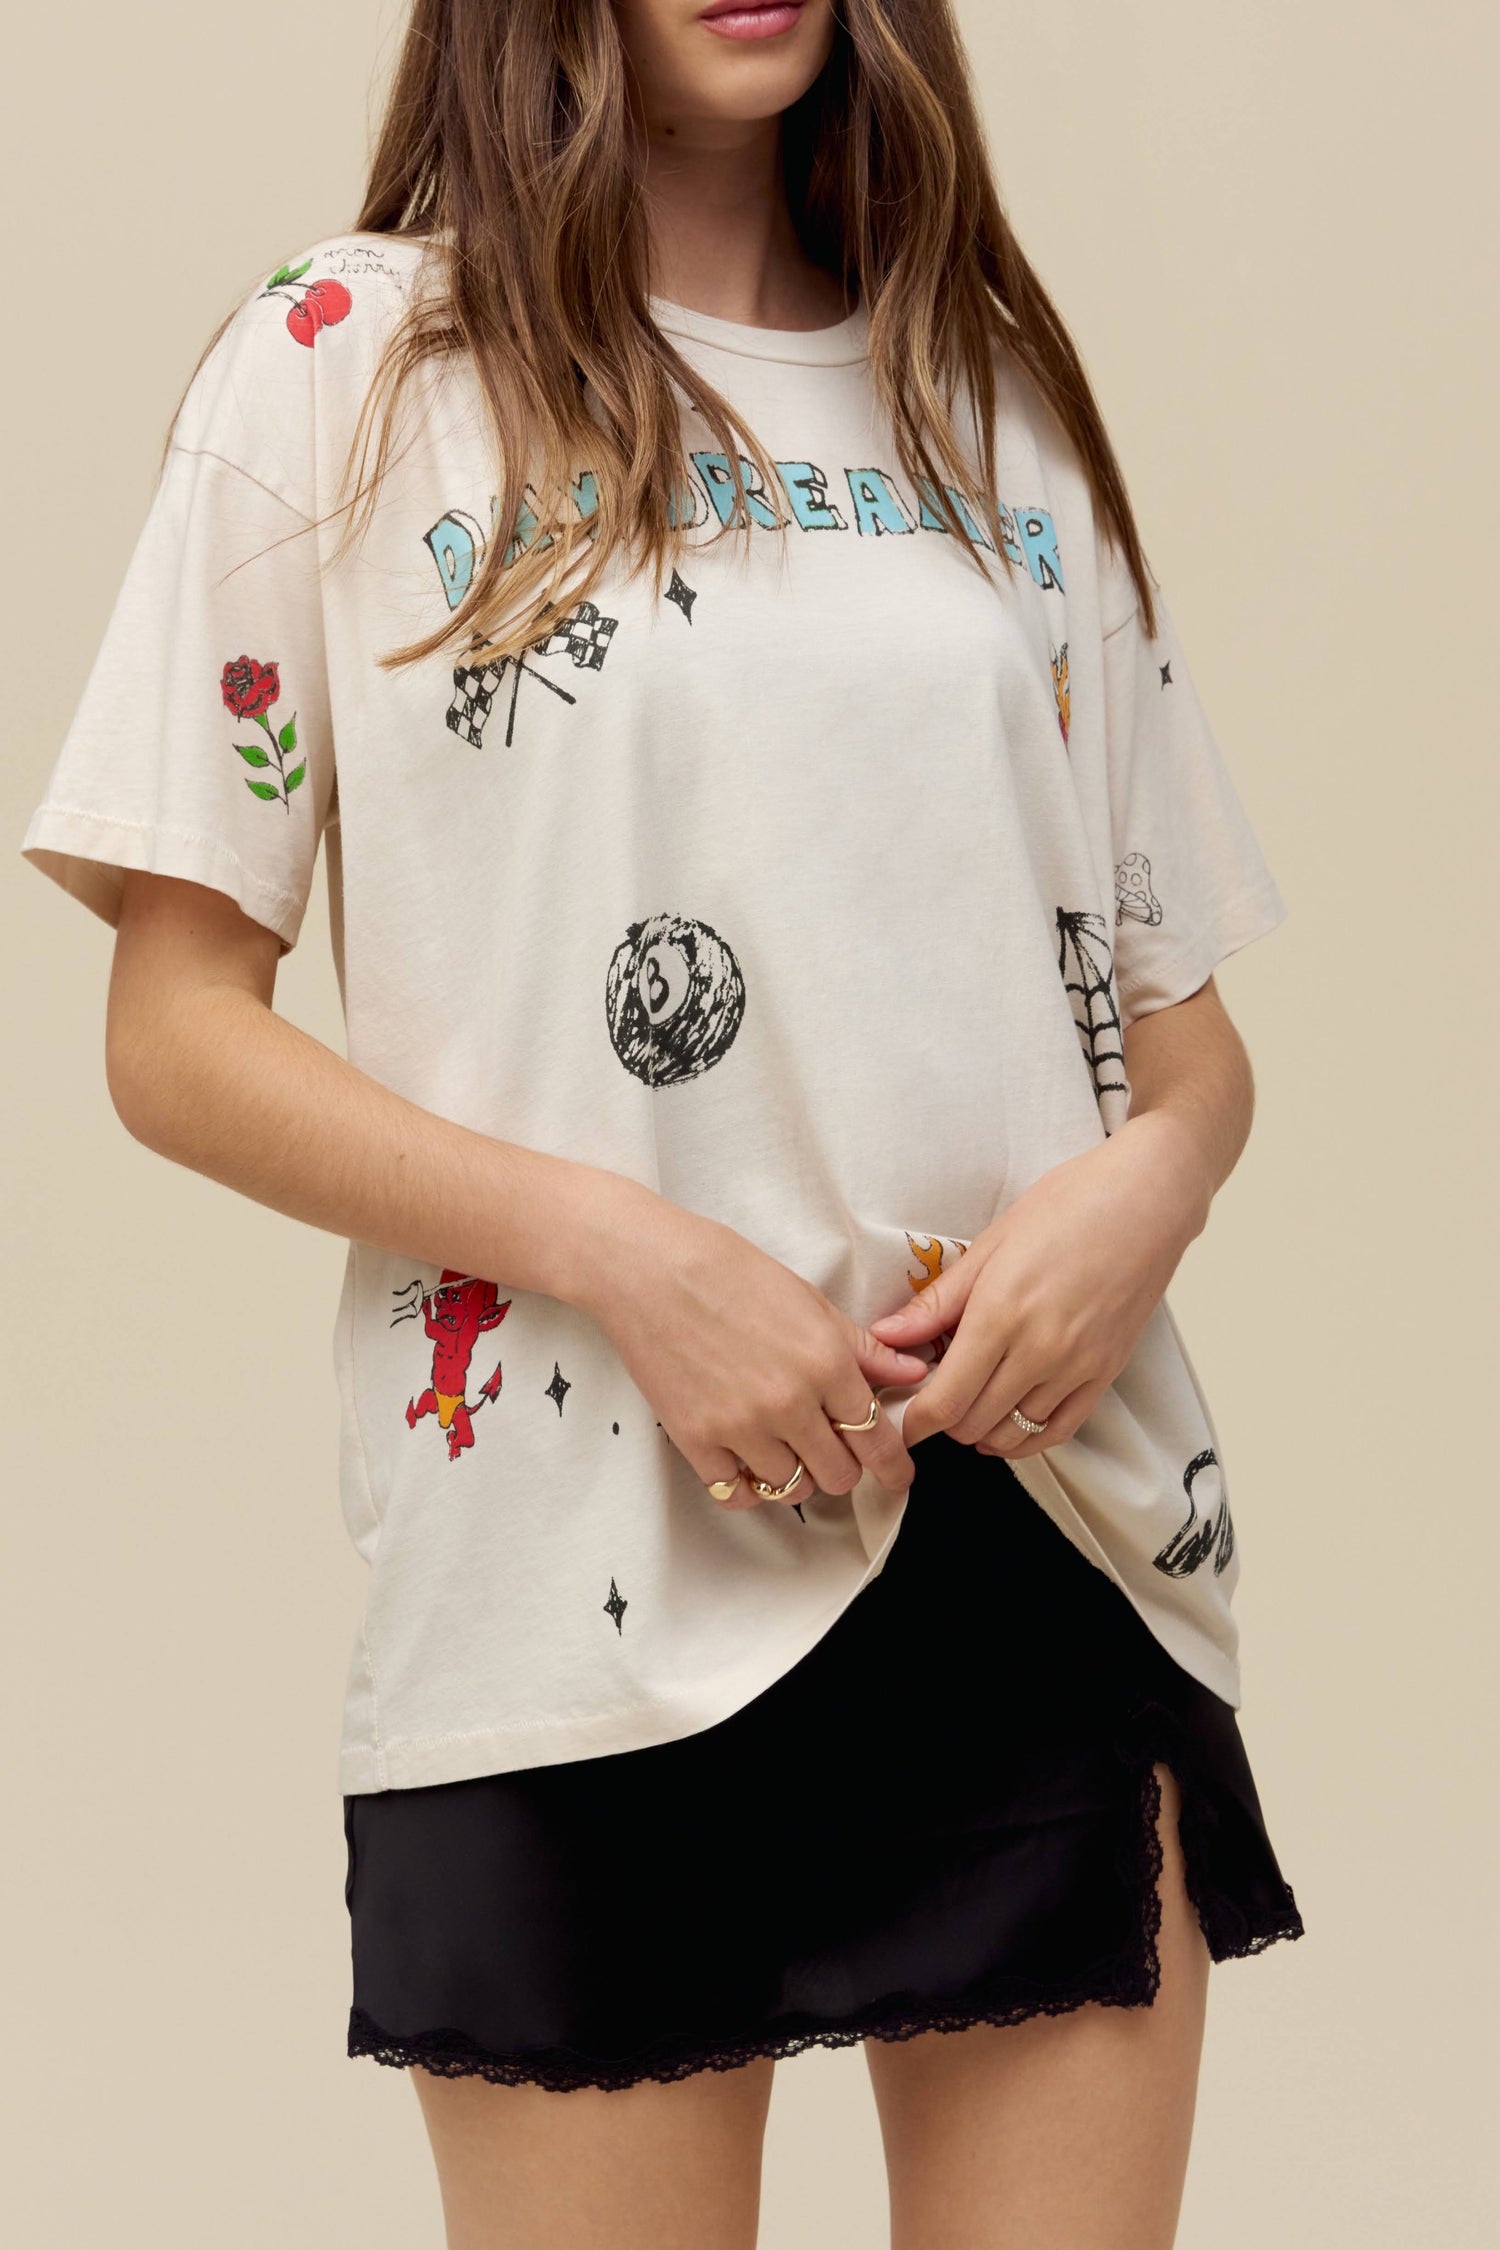 A model featuring a white tee stamped with daydreamer and designed with hand-drawn symbols.